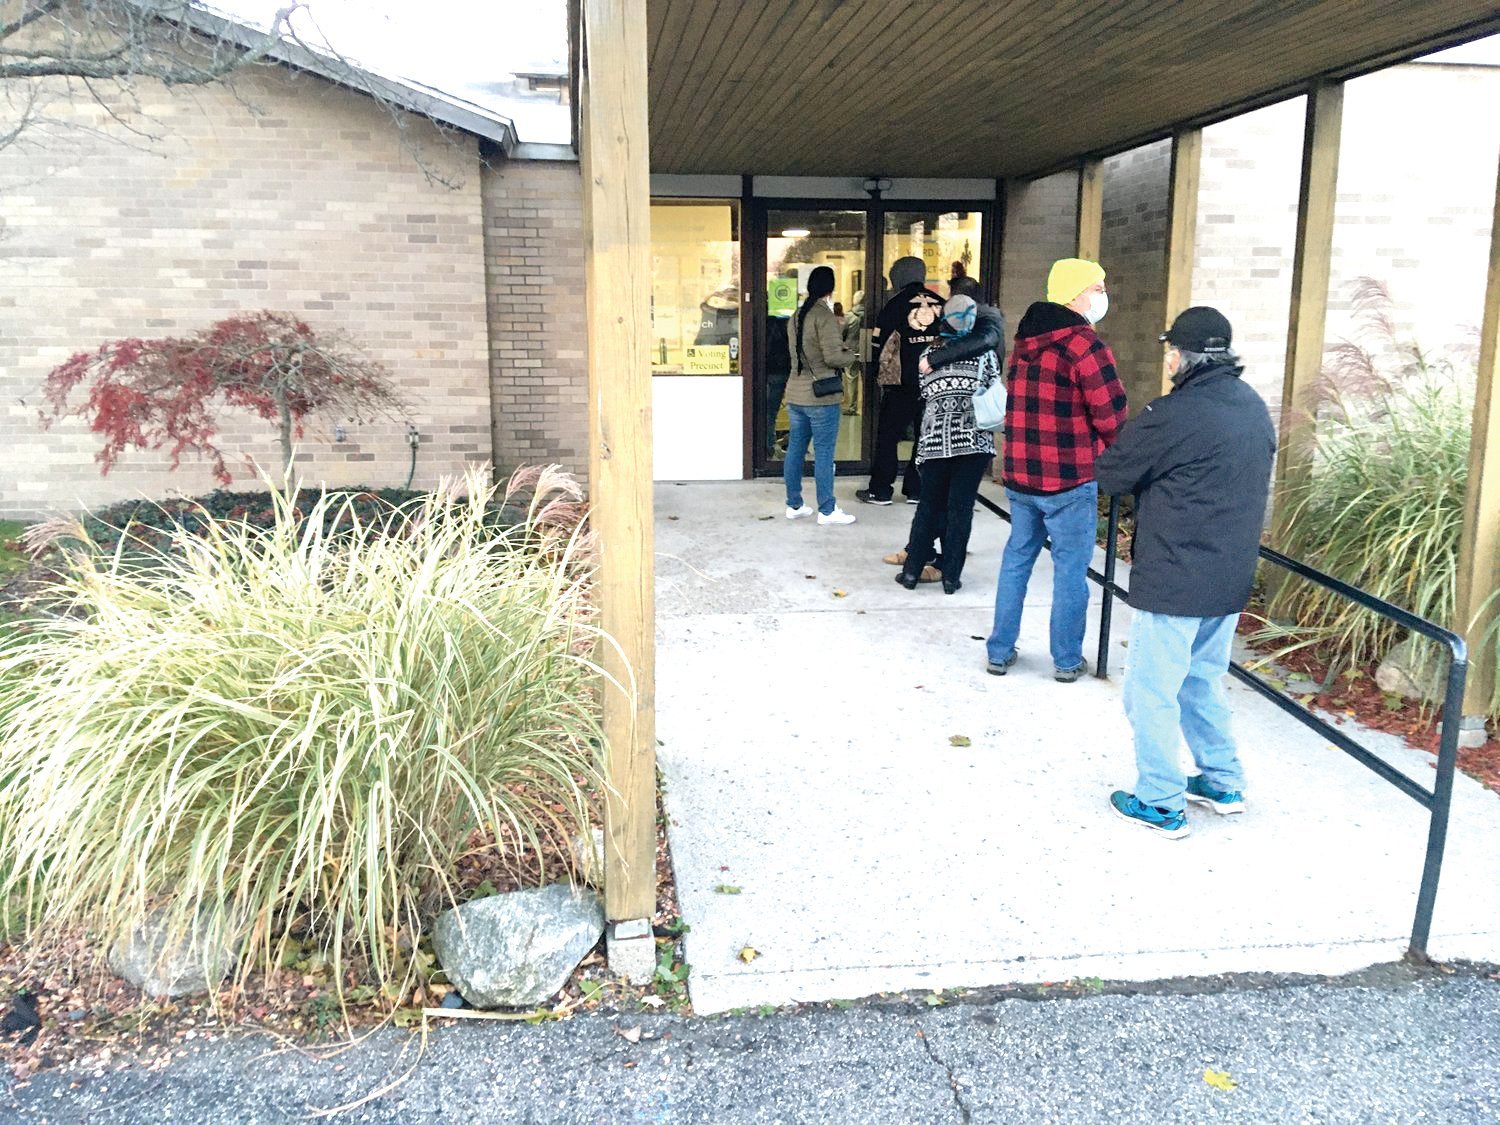 Voters stand in line early morning on Election Day 2020 at St. Stephen’s Lutheran Church in Delta Township.